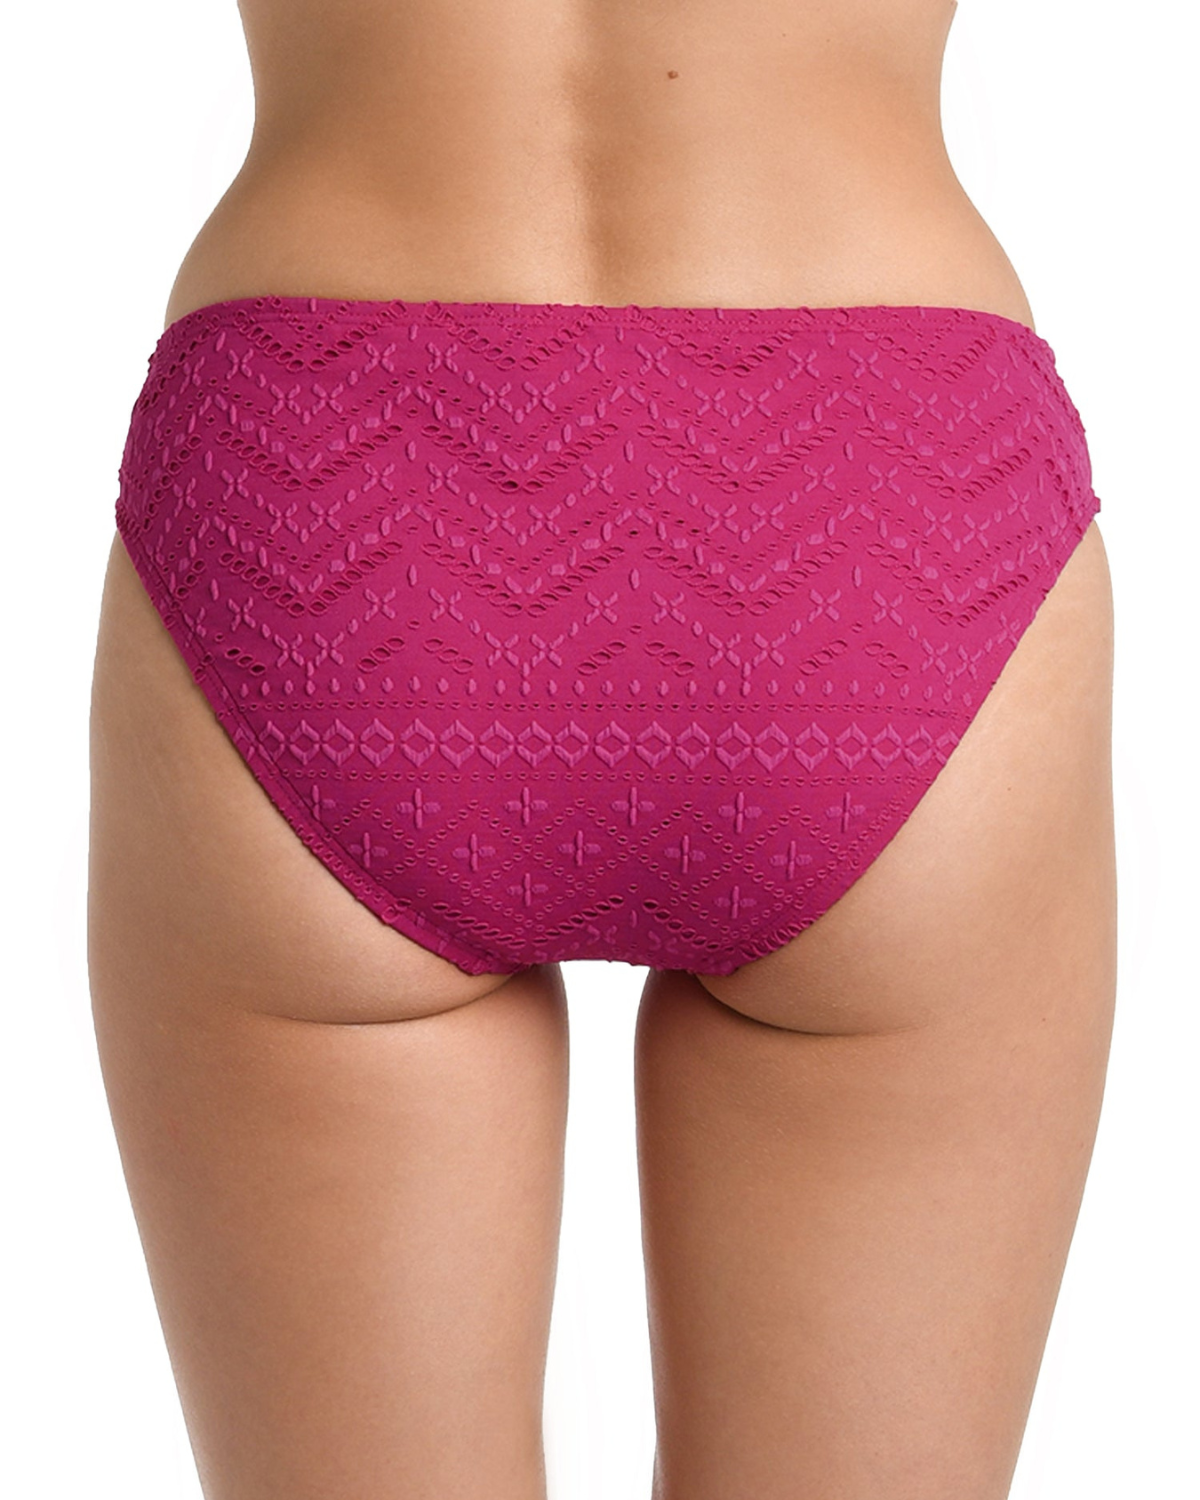 Model wearing a hipster bottom in pink